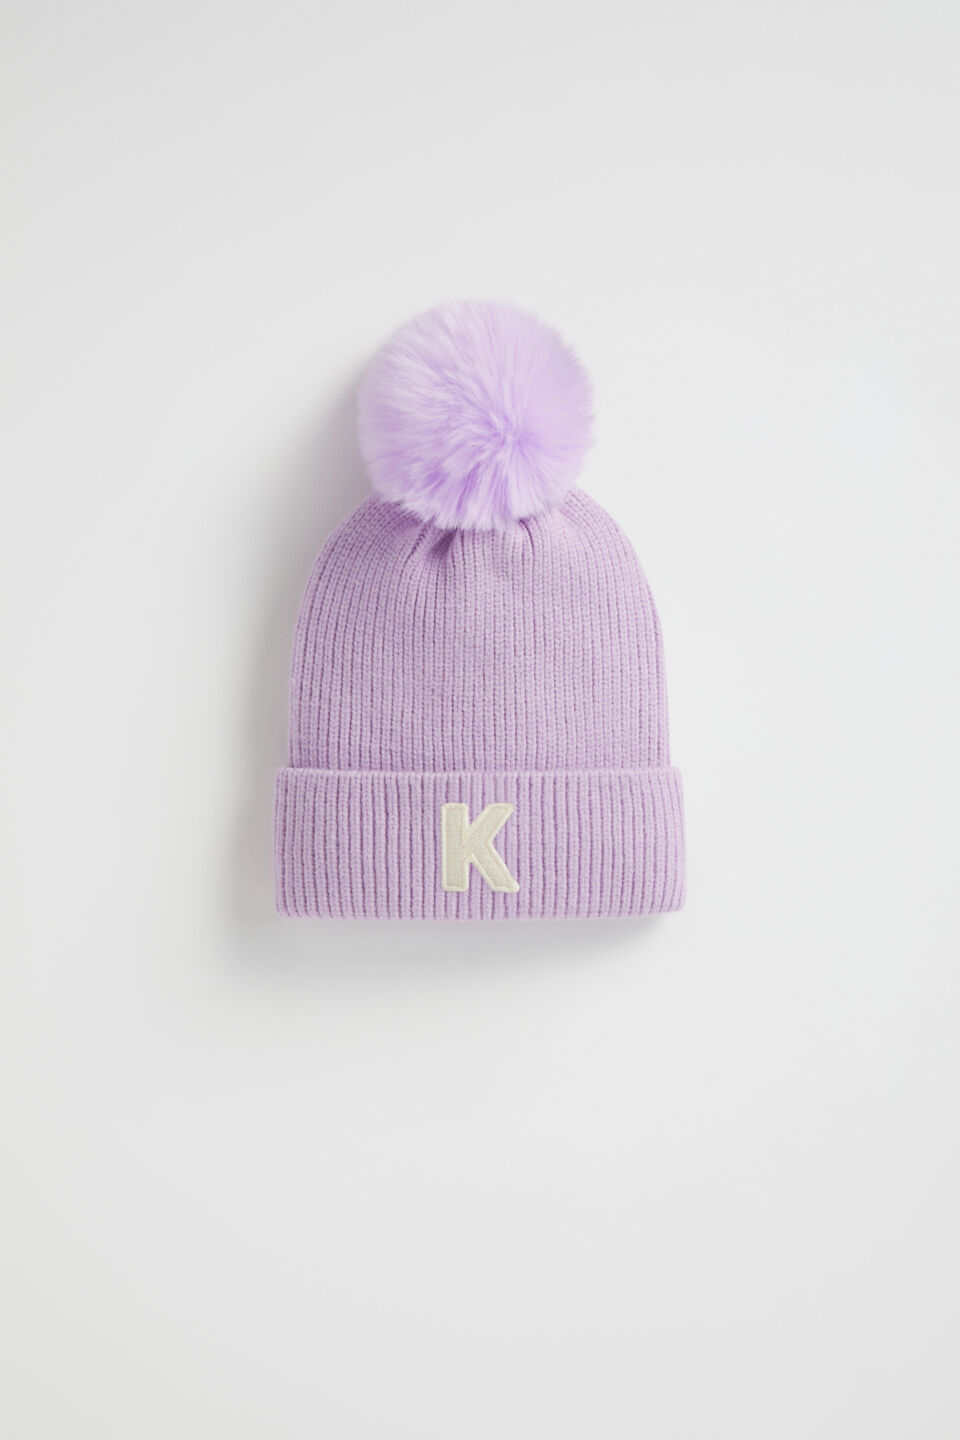 Embroidered Initial Beanie  K